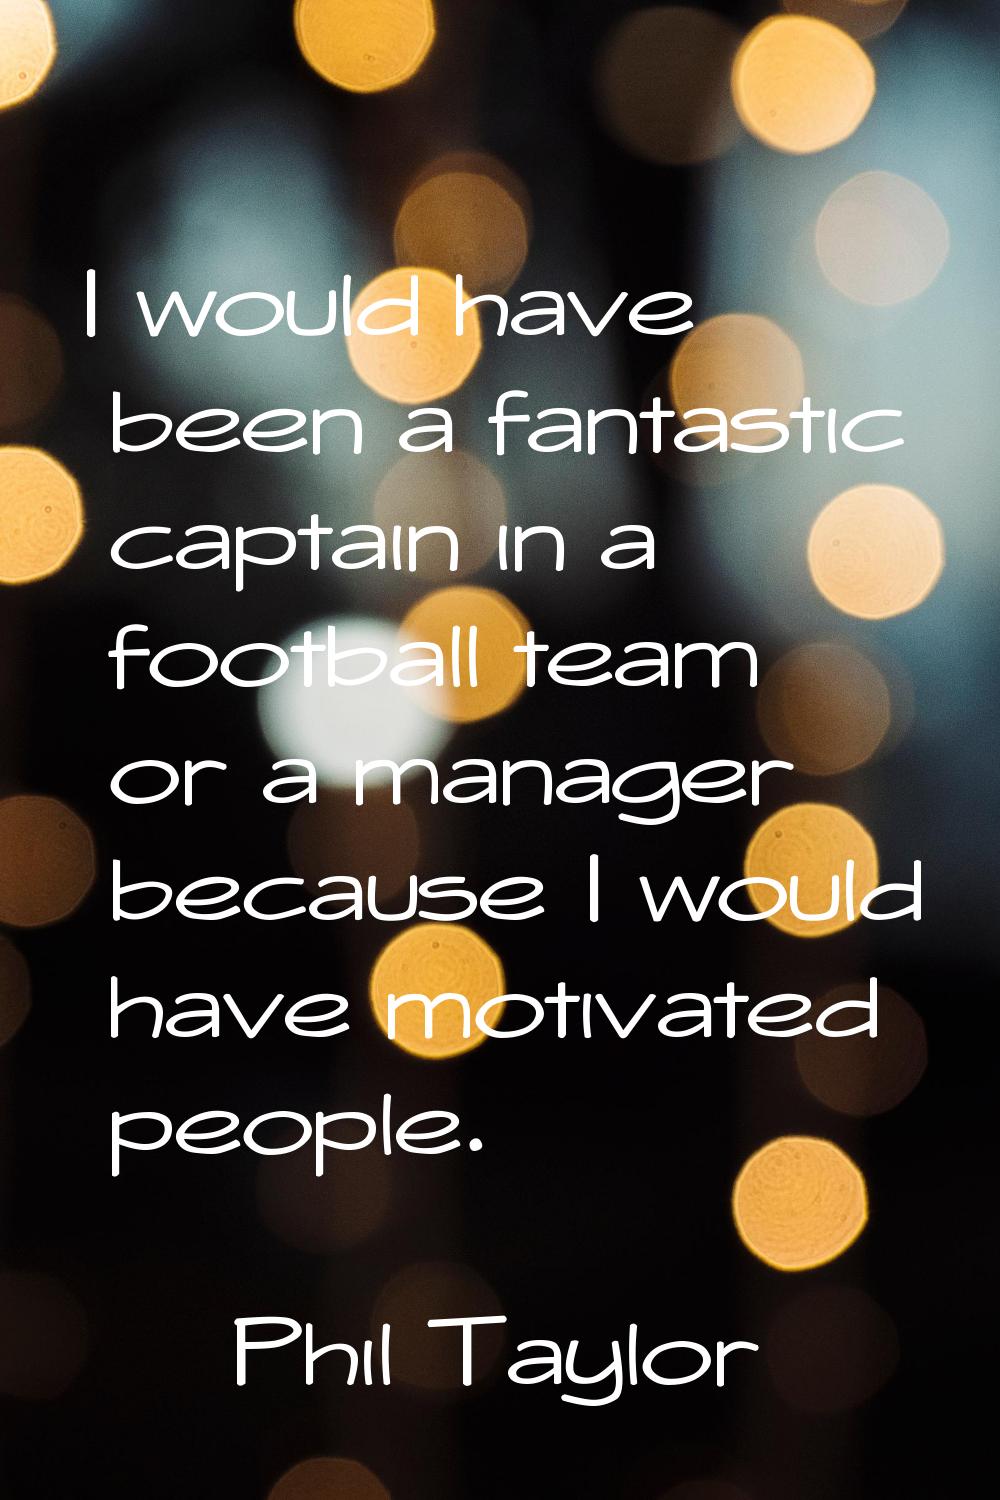 I would have been a fantastic captain in a football team or a manager because I would have motivate